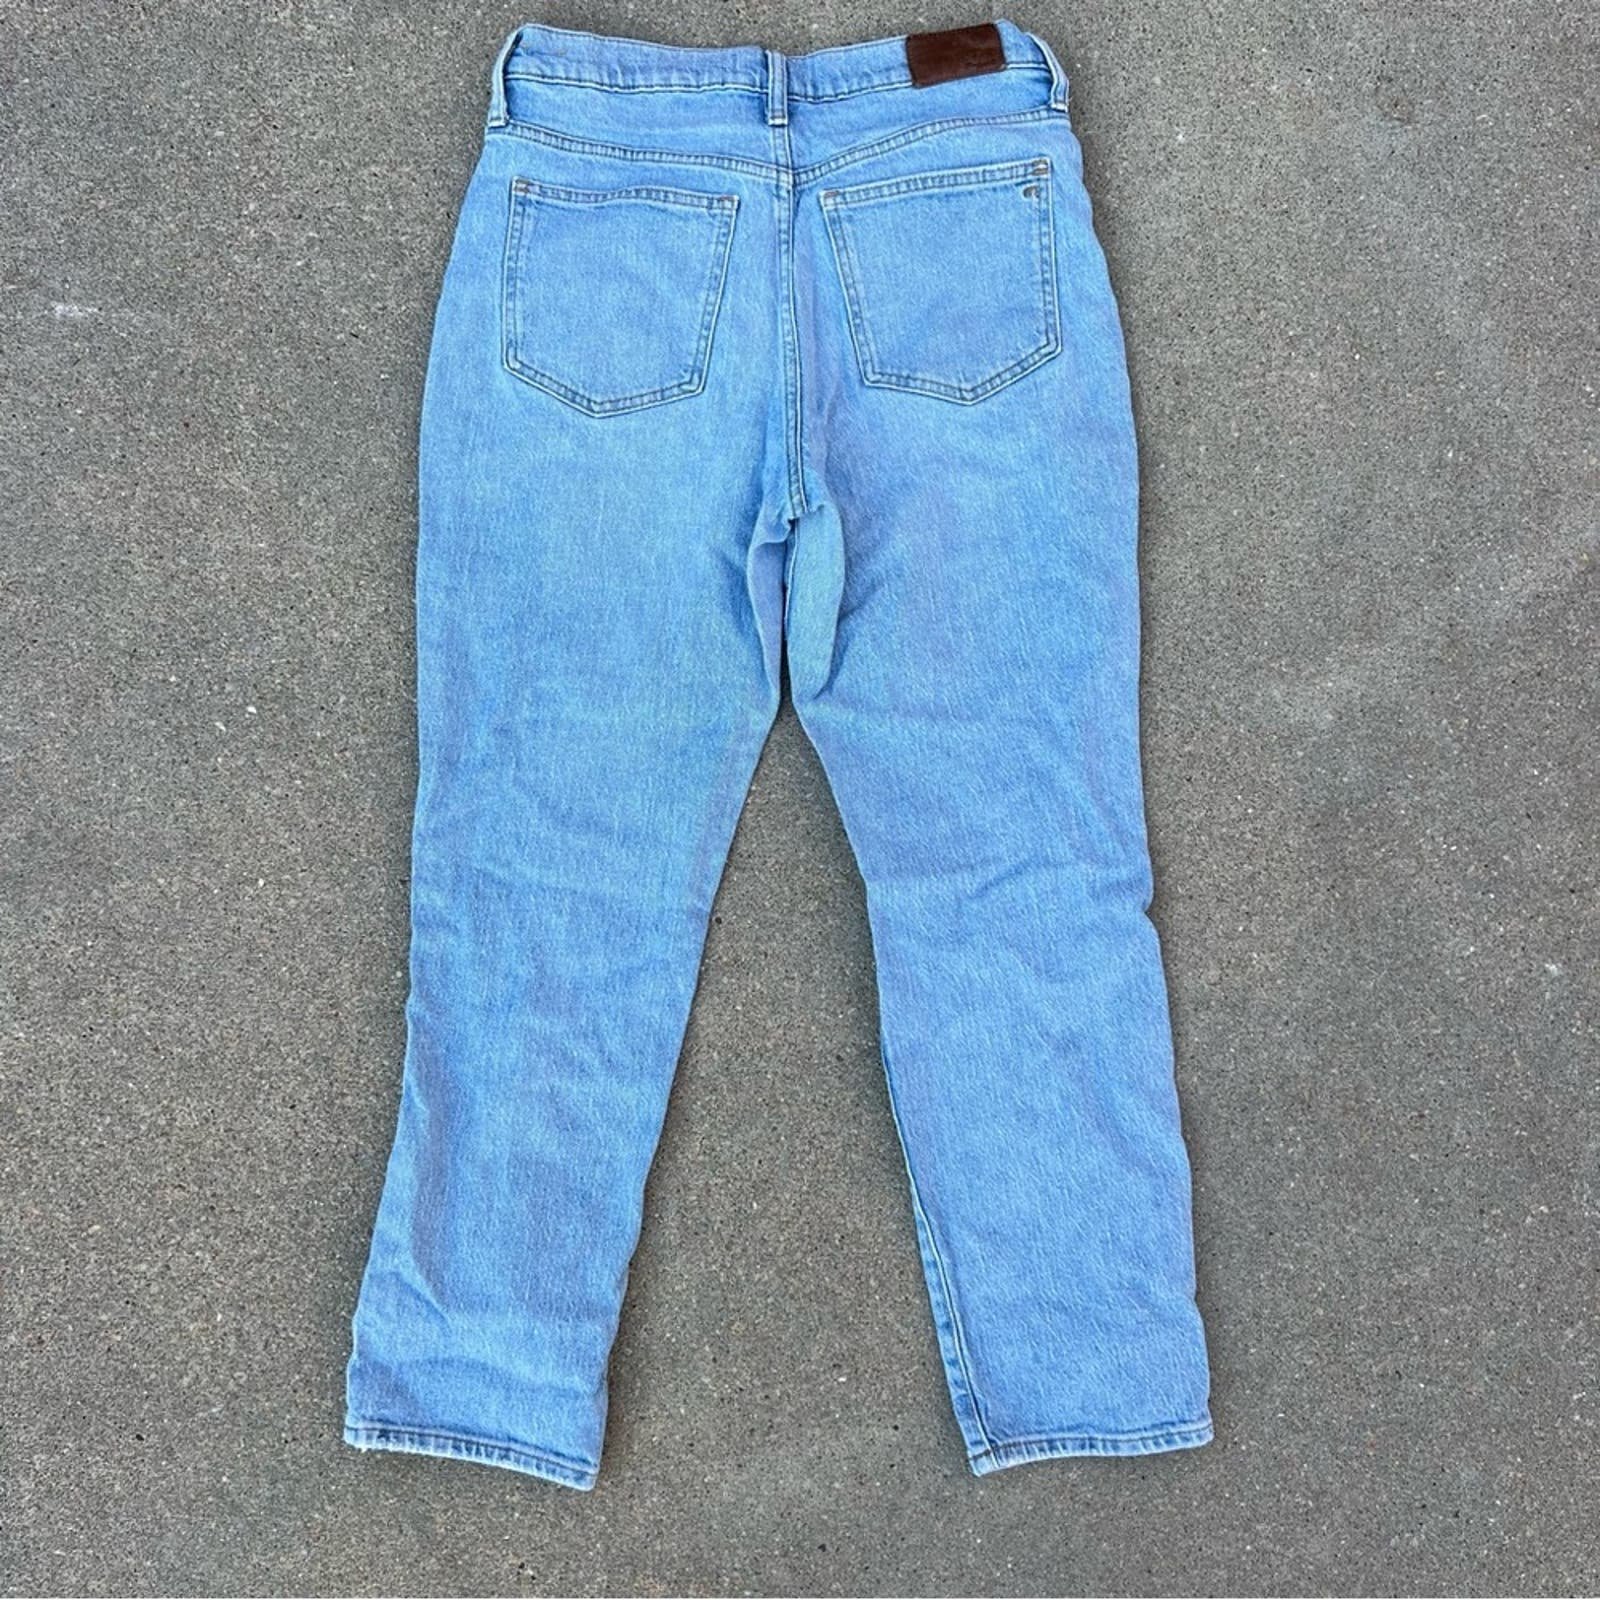 Exclusive Madewell the PERFECT Vintage Jeans Fiore Wash Size 27 GRjKvcoby Fashion